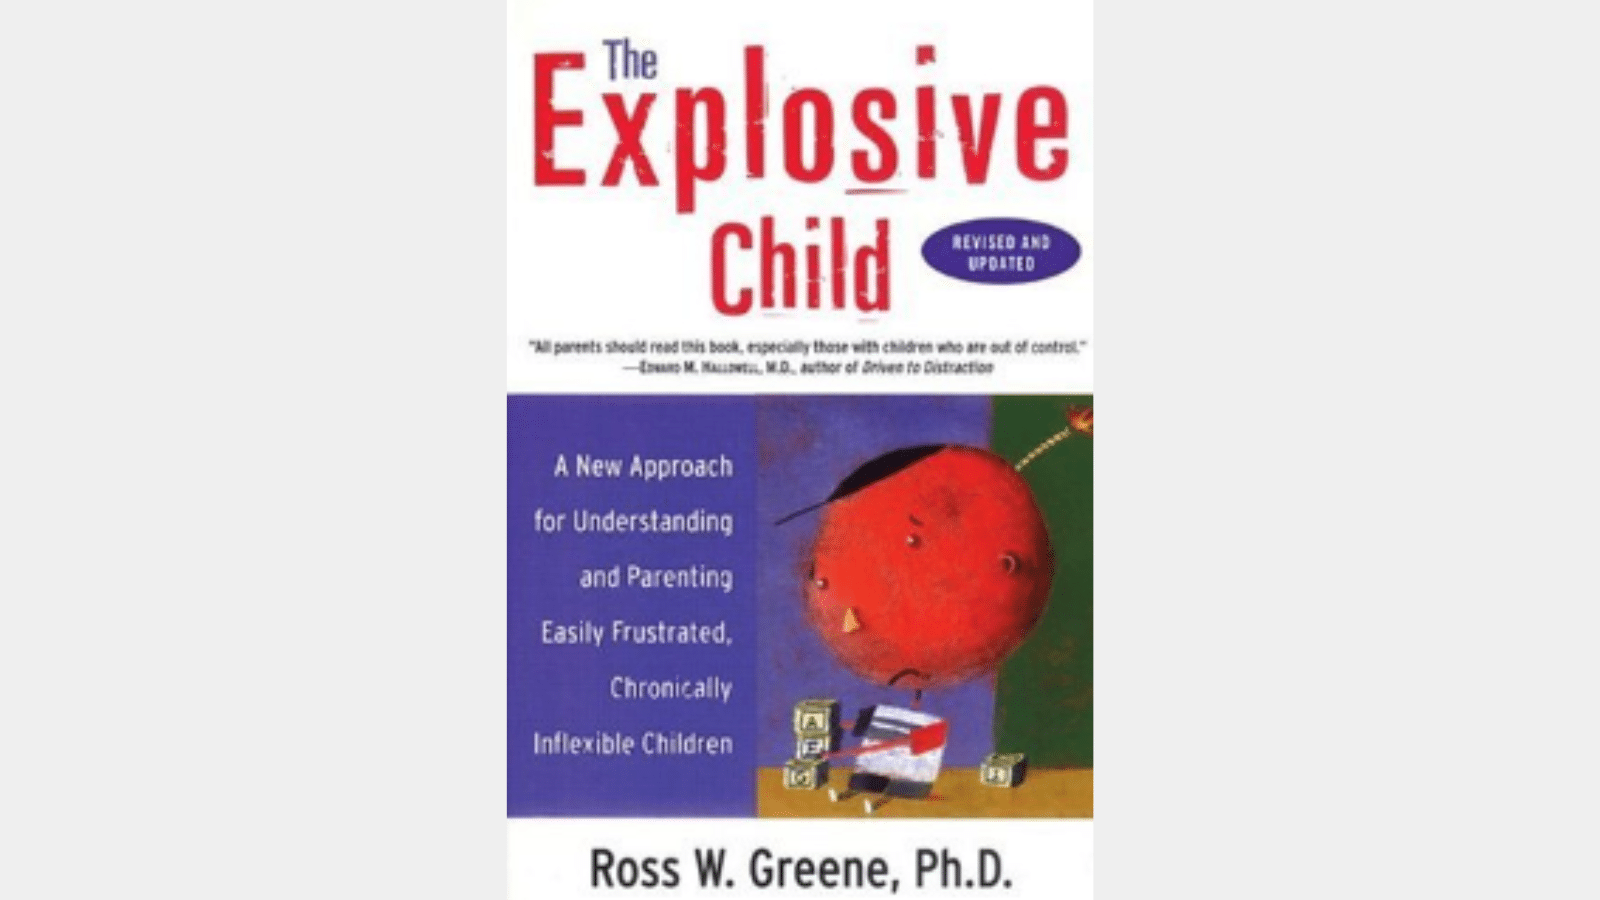 <p><span>For a parent, this book has offered immense insight into the uncertain domain of <a href="https://wealthofgeeks.com/things-no-one-told-parents/" rel="noopener">parenting</a> children who show extreme temper and challenging behaviors. Knowing how to deal with such situations without blaming the parent or the child can be powerful.</span></p>